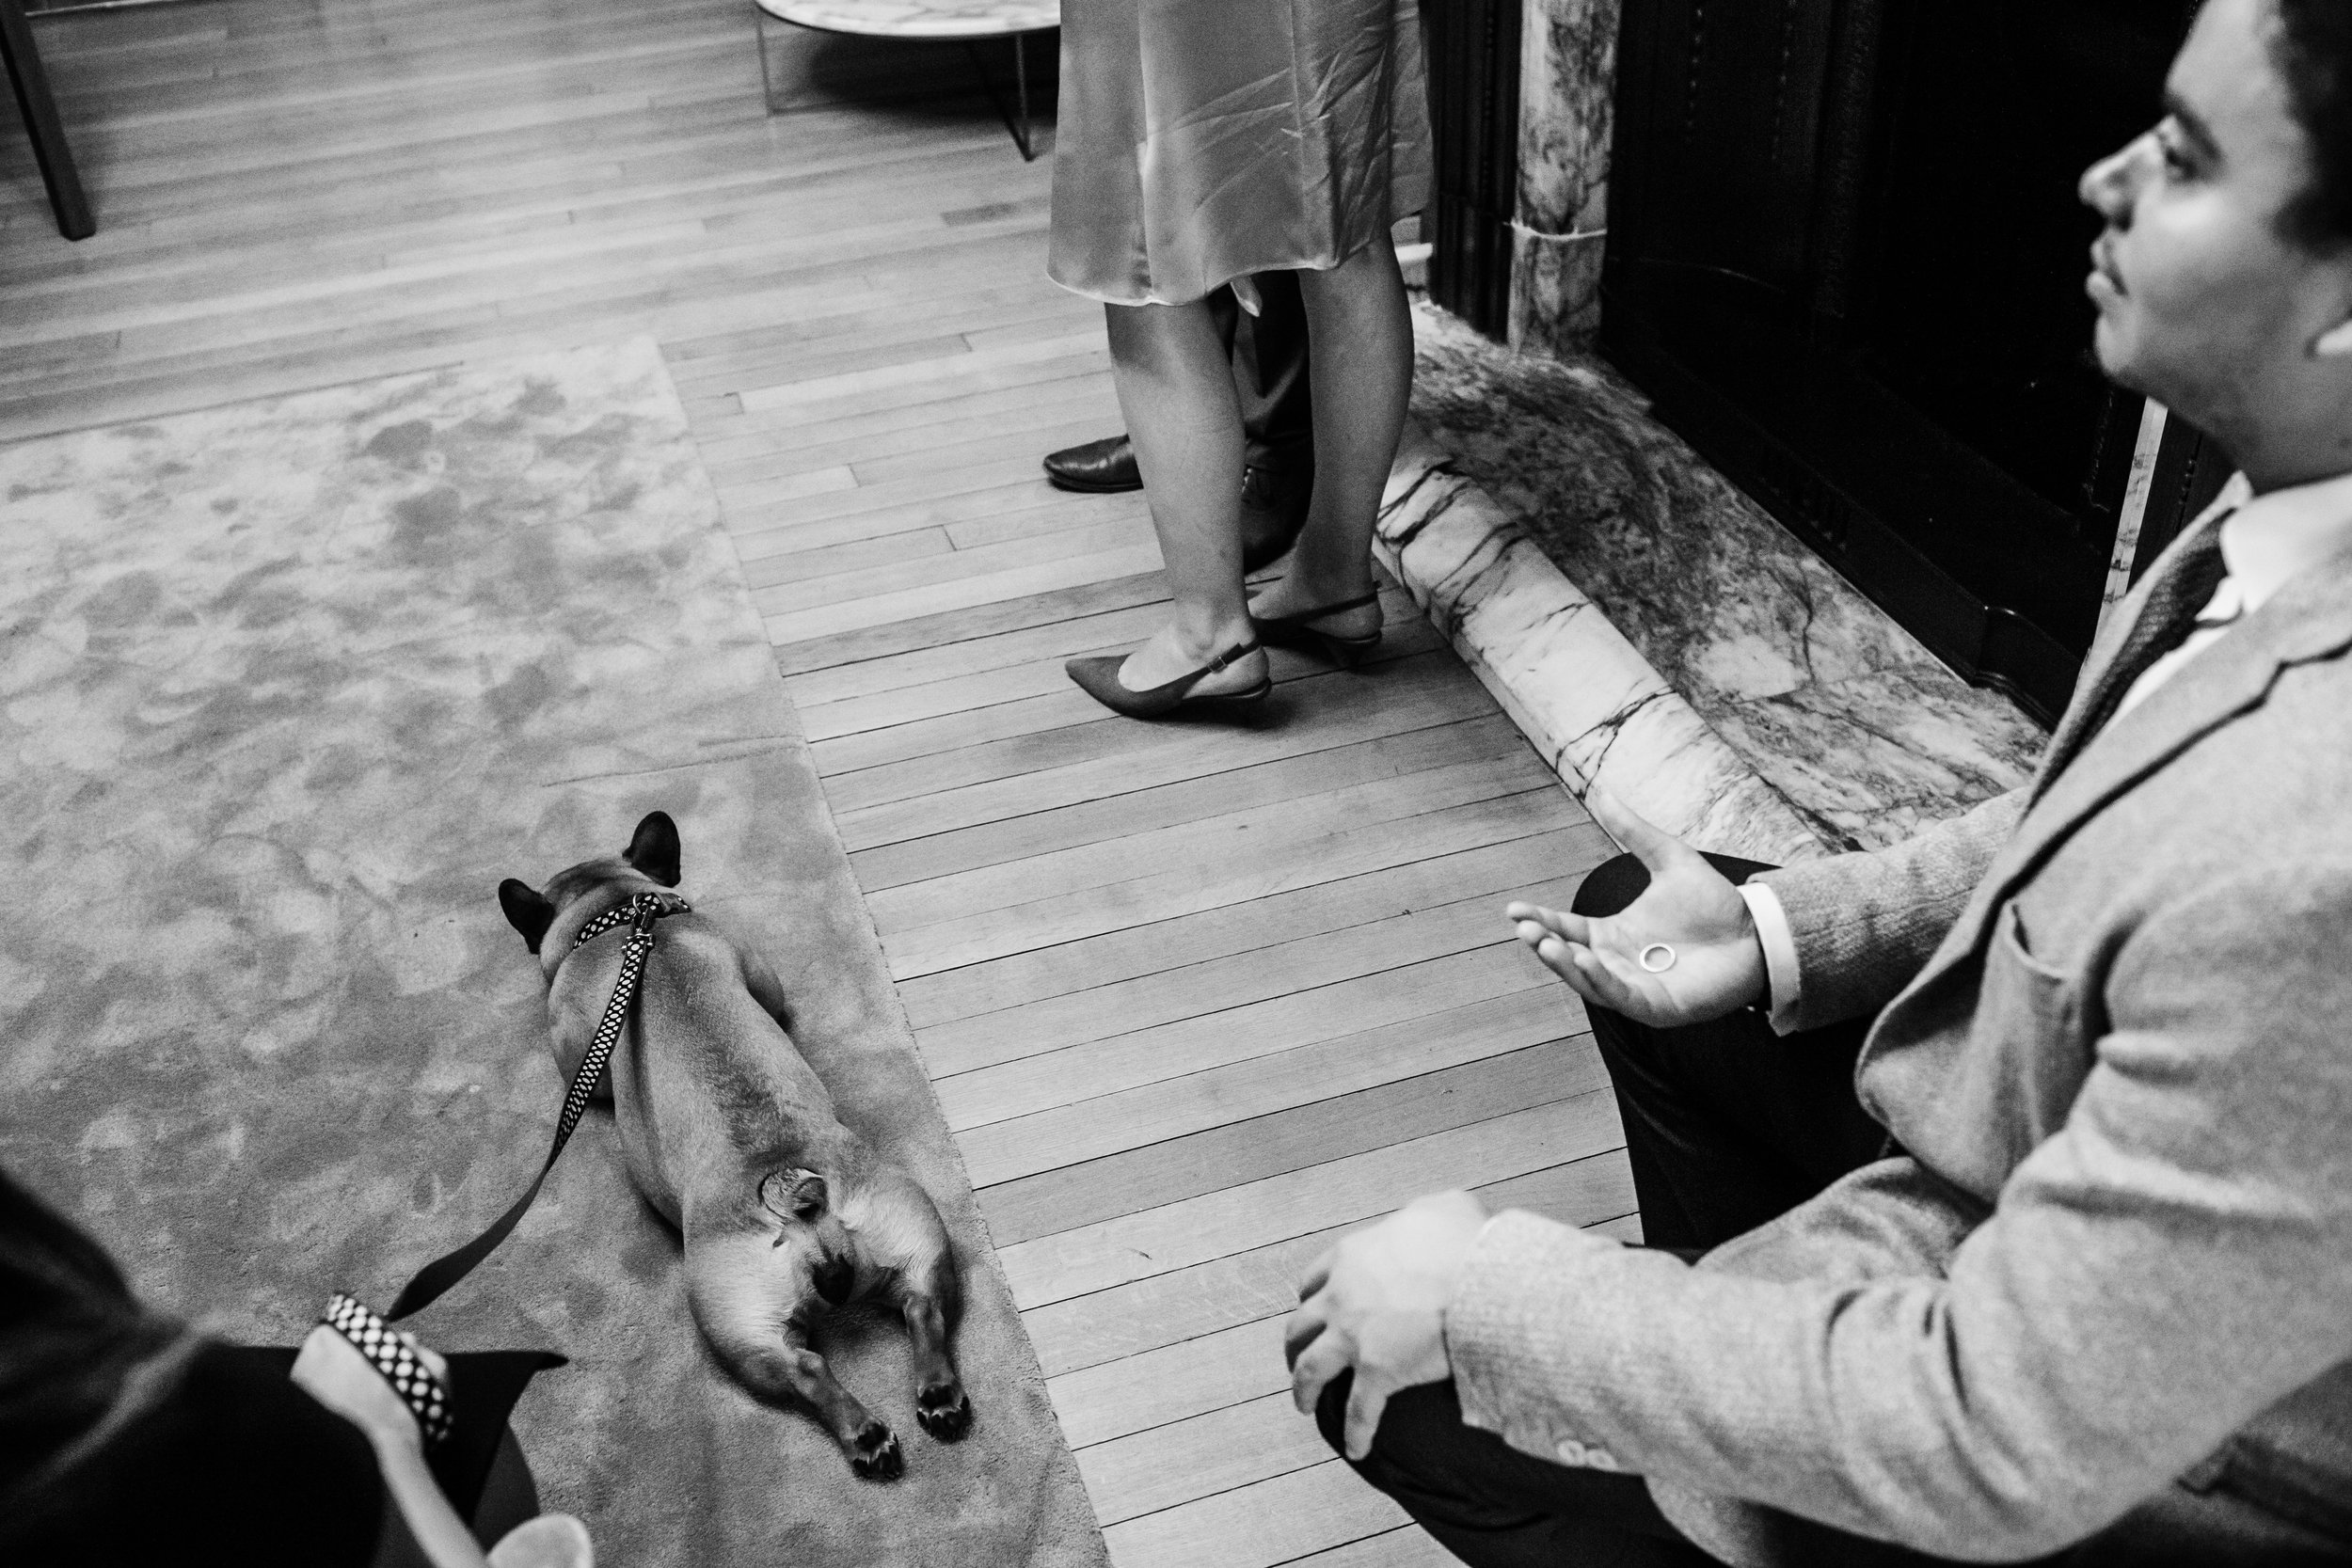 the feet of the bride and groom can be seen while the best man holds the rings and a french bulldog lays on the fllor asleep